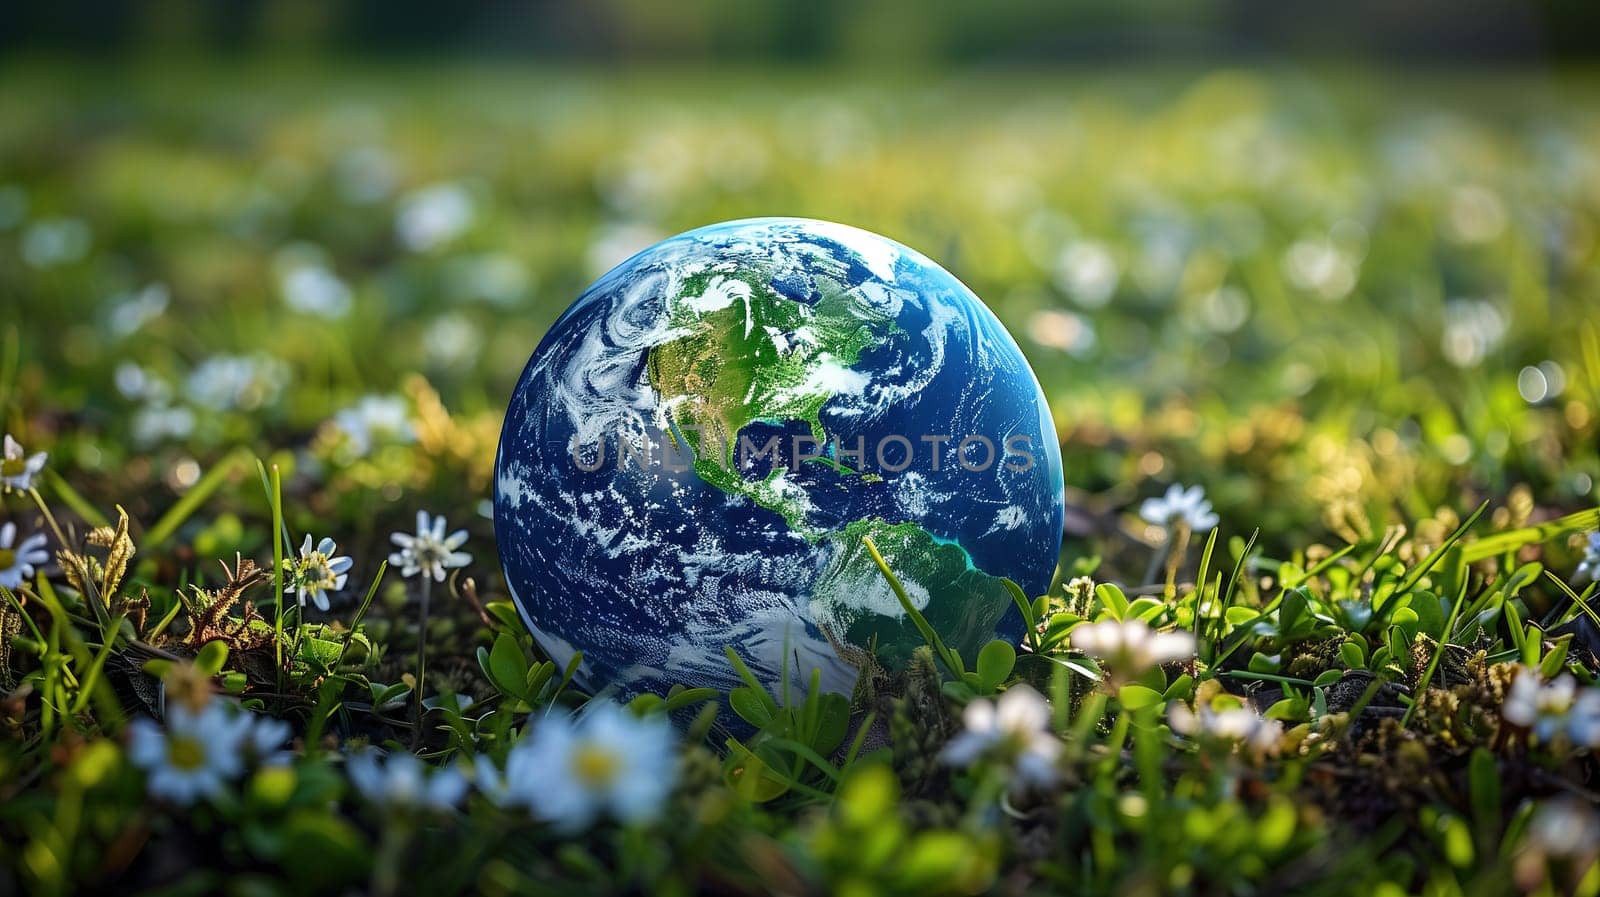 A small model of the Earth is nestled among vibrant green grass and delicate white flowers, symbolizing environmental awareness and the celebration of Earth Day in the freshness of spring.